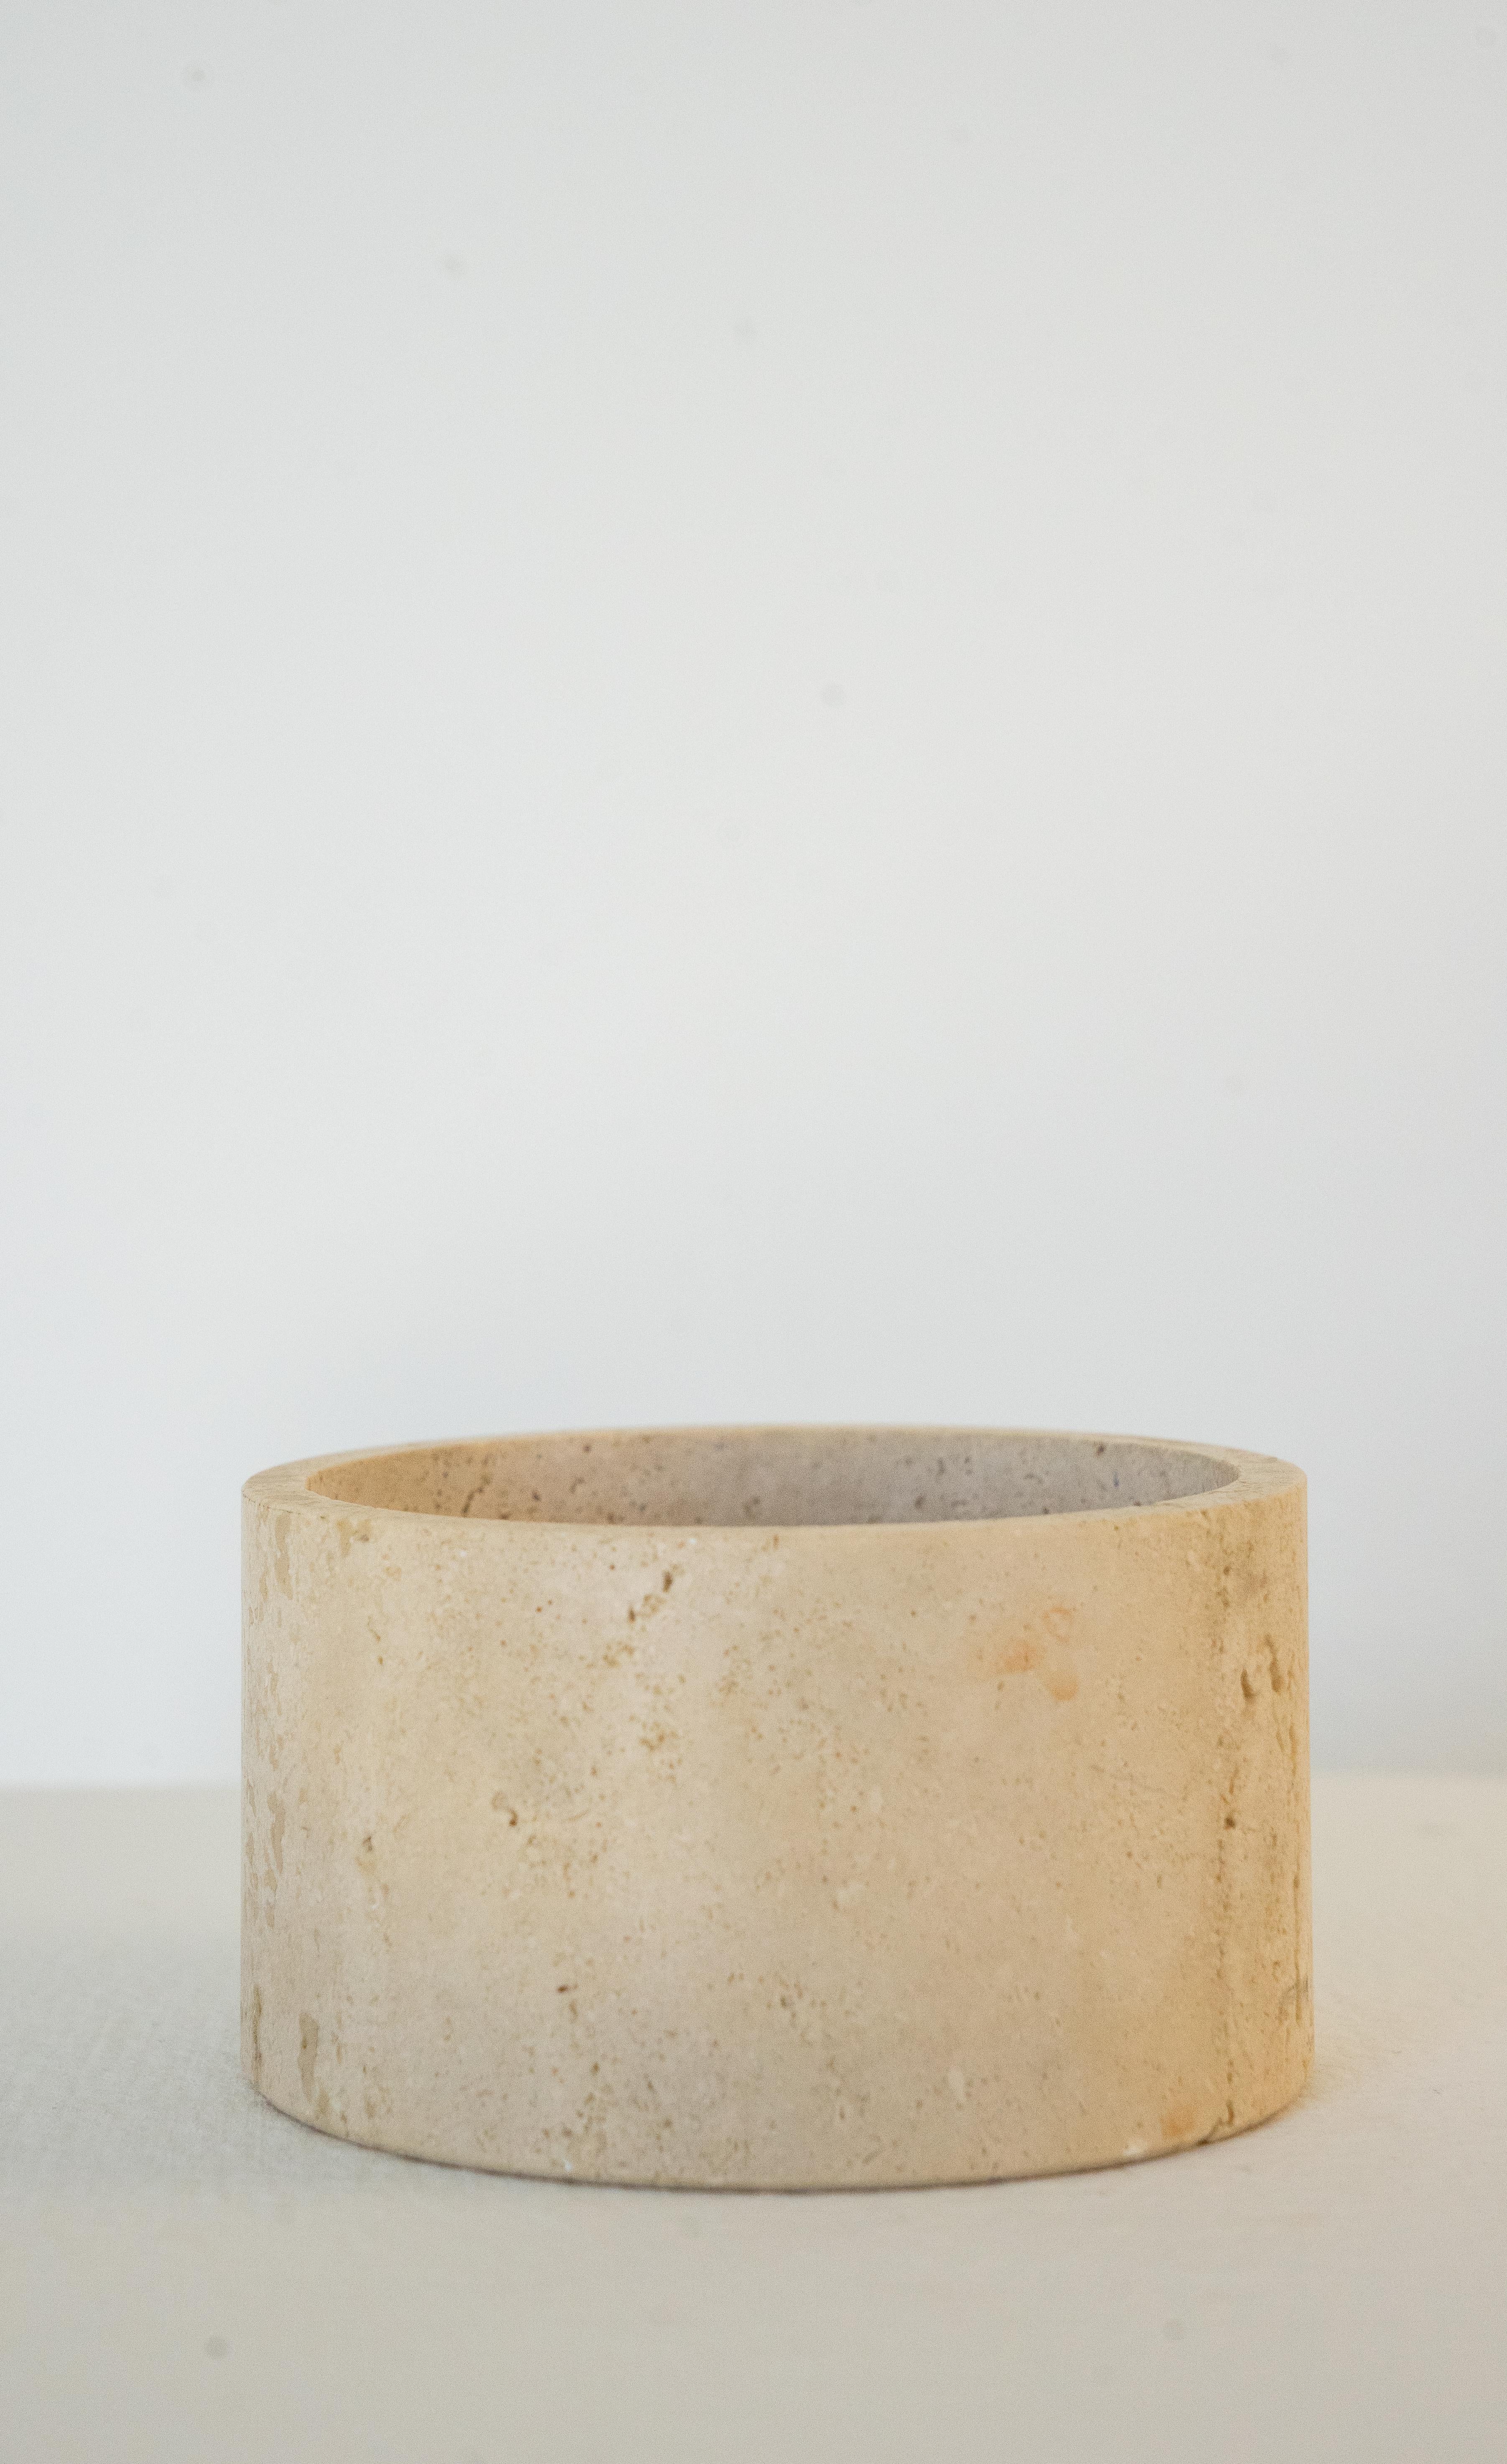 Beautiful architectural organic travertine vessel / cylinder bowl. 

Made in Italy. Circa 1970s. 

Great design that would compliment any setting or style of interior decor. 

Versatile design that would work well with most interior design